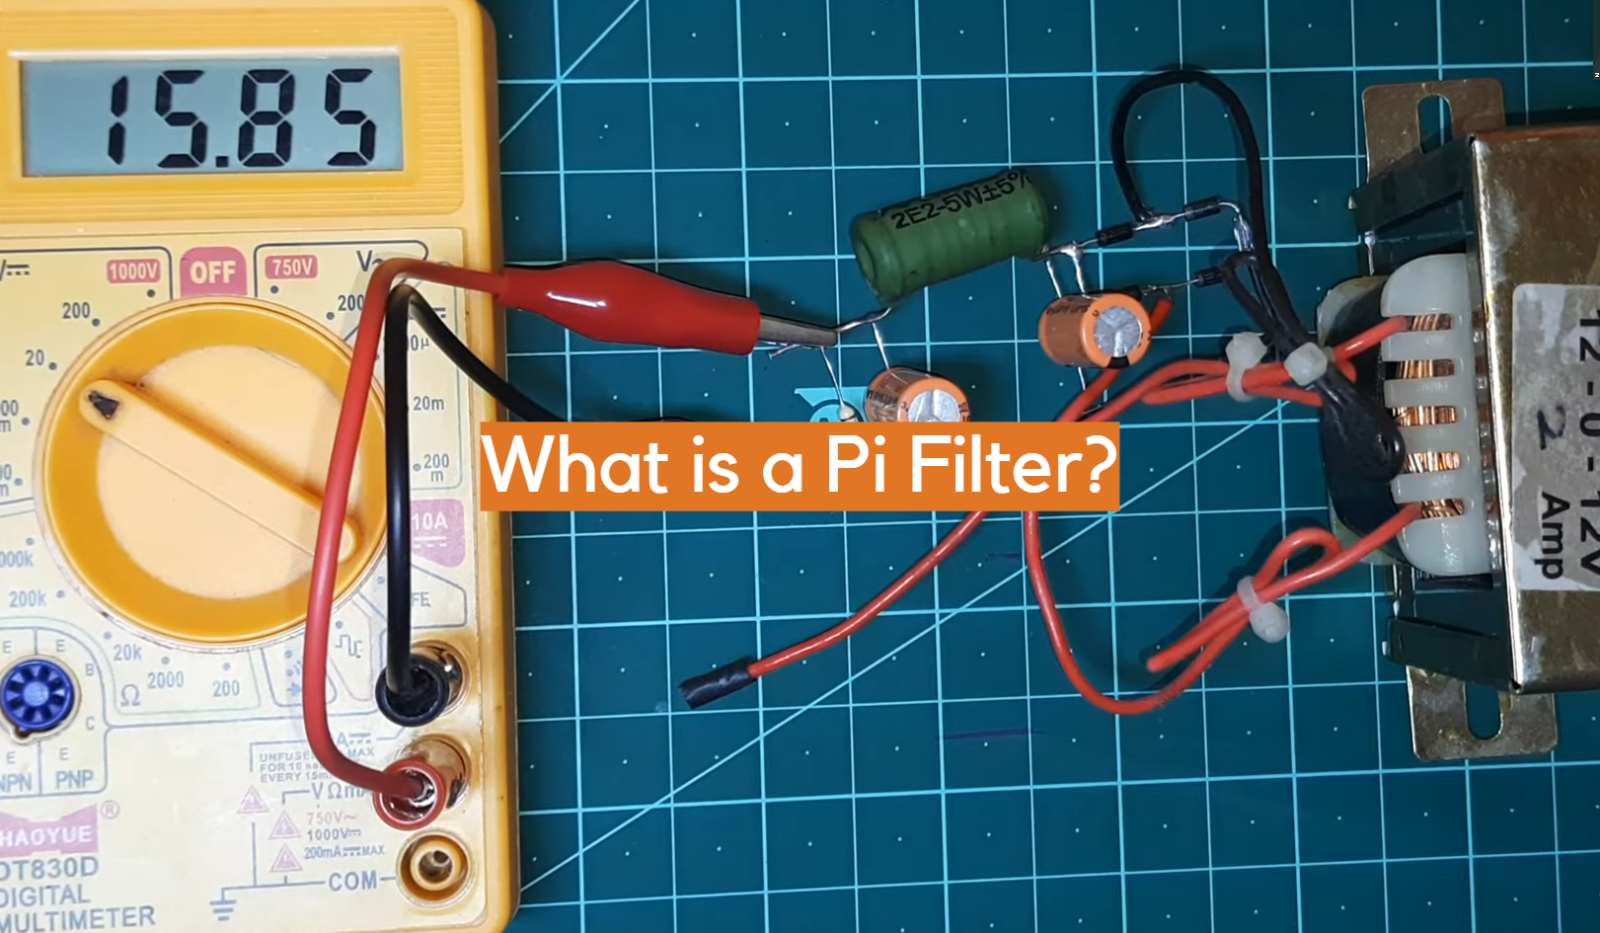 What is a Pi Filter?